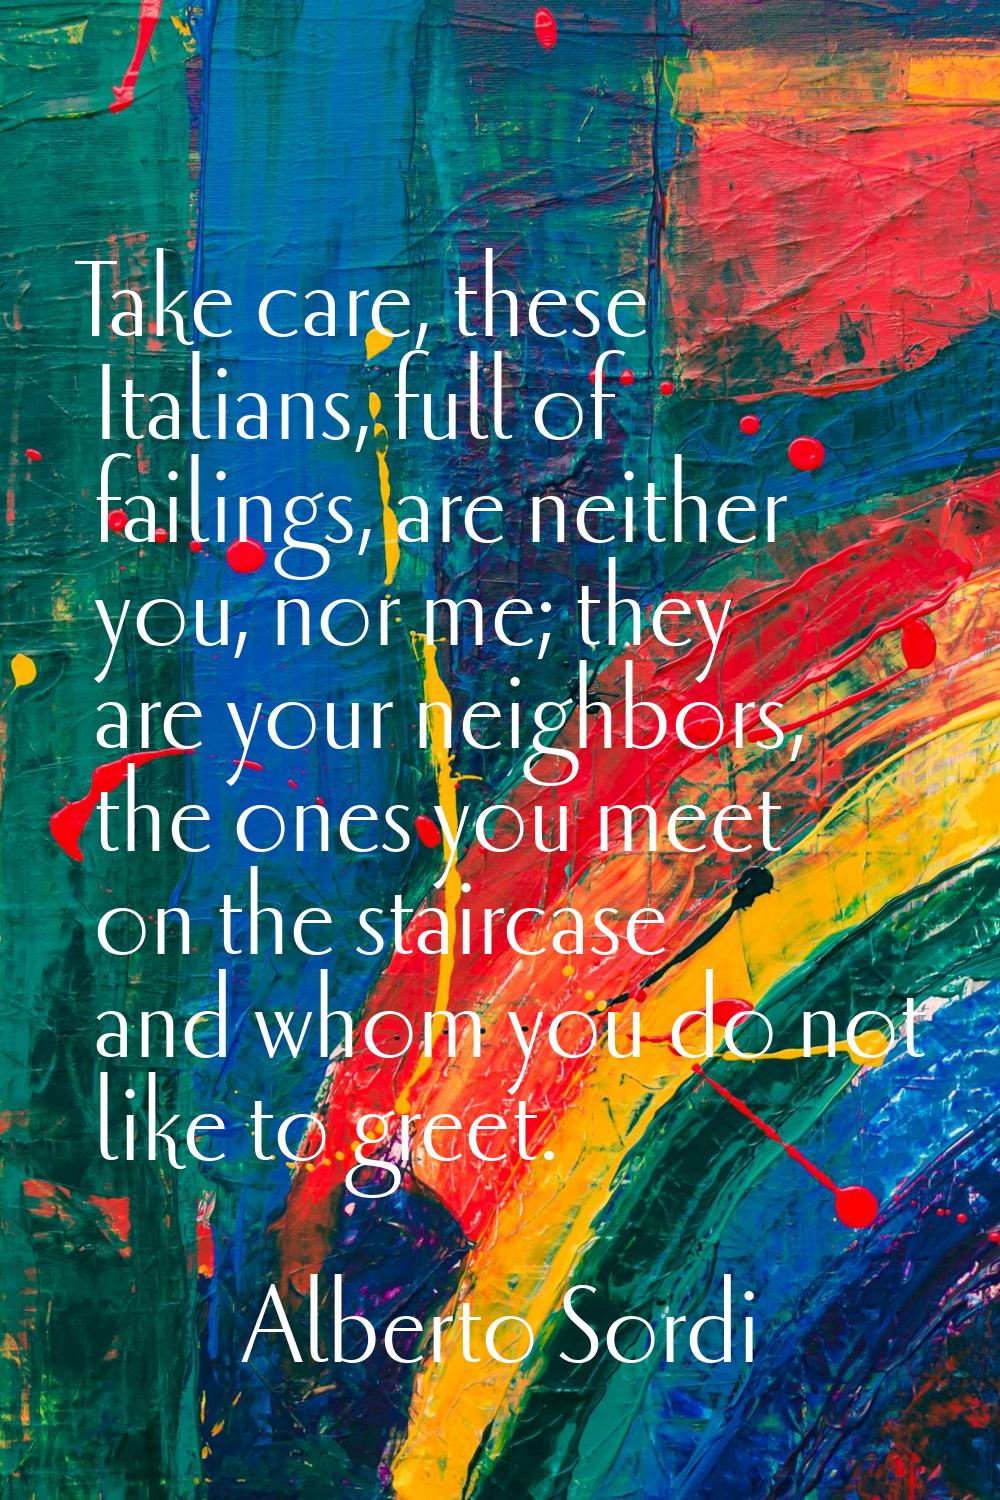 Take care, these Italians, full of failings, are neither you, nor me; they are your neighbors, the 